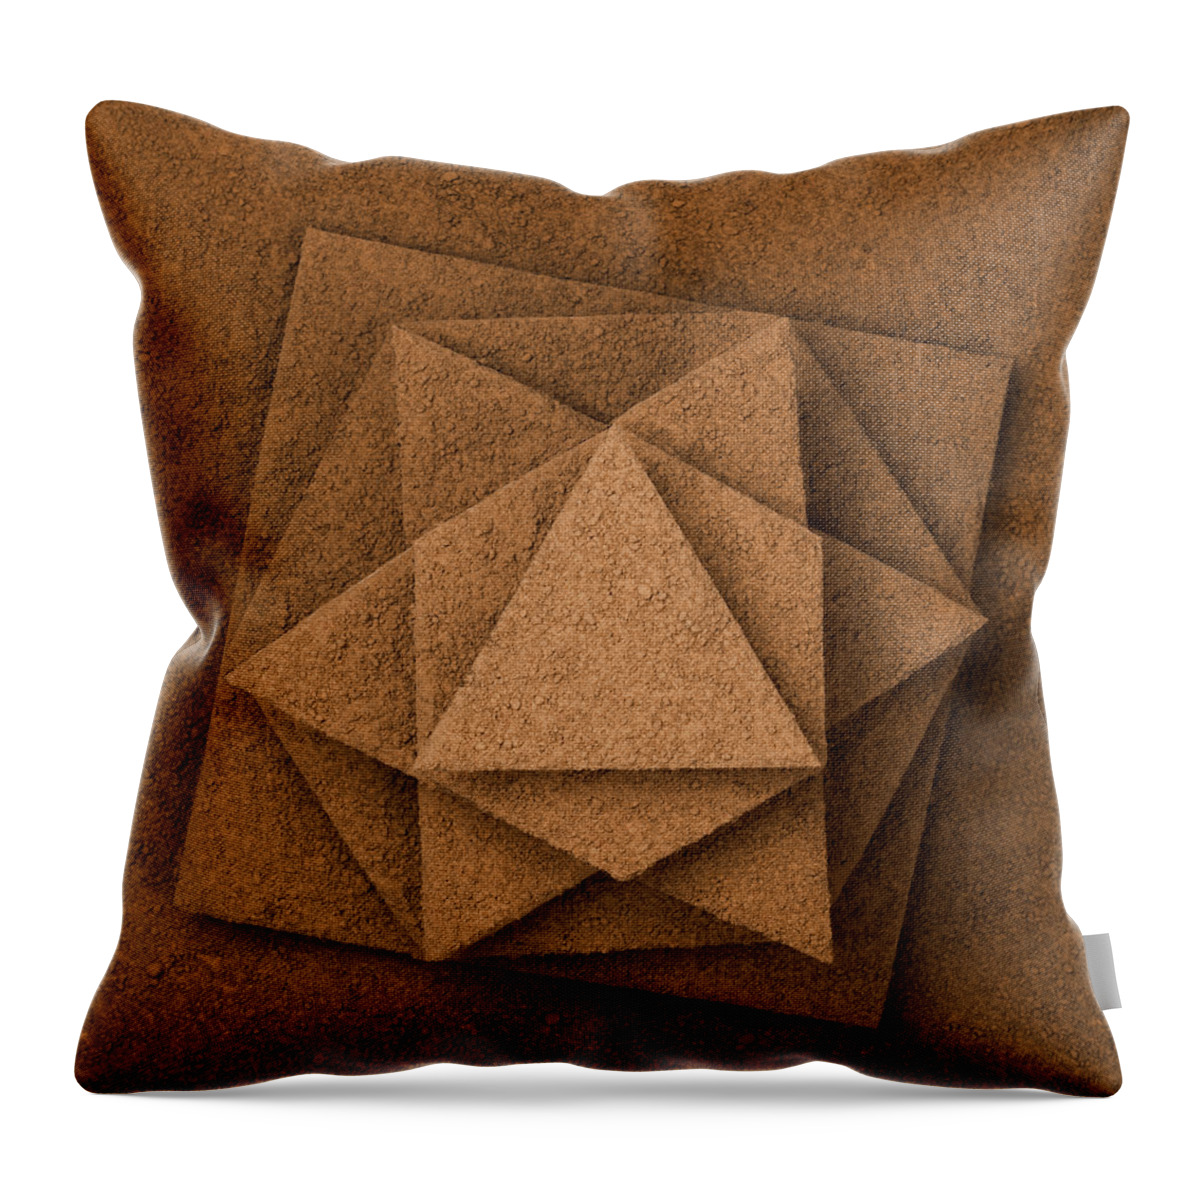 Triangle Shape Throw Pillow featuring the photograph Soil Depth by Roc Canals Photography